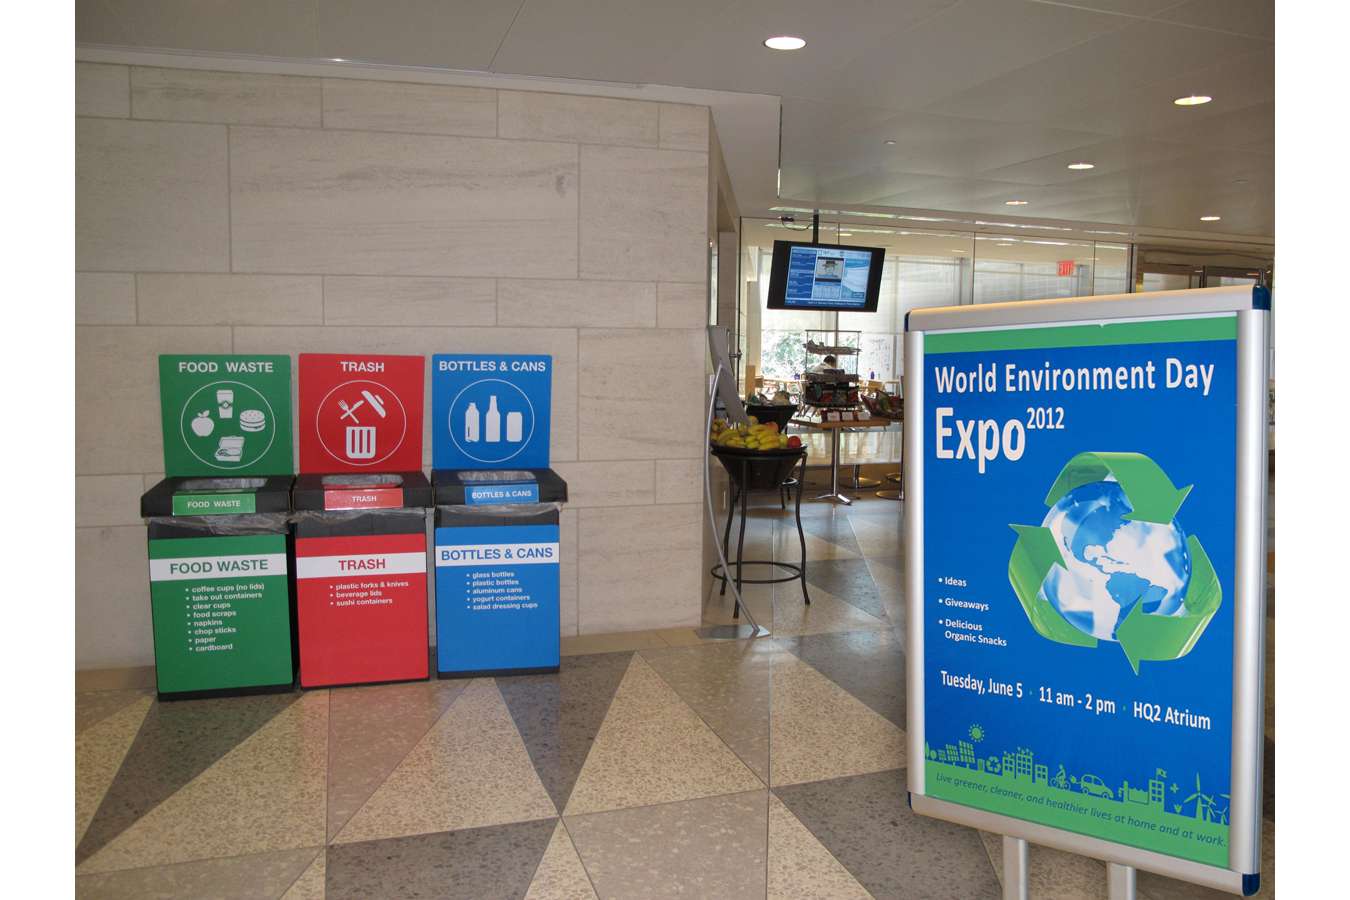 IMF Pic 2a : Recycling bins with recycled PVC signs  |  World Environment Day event poster 